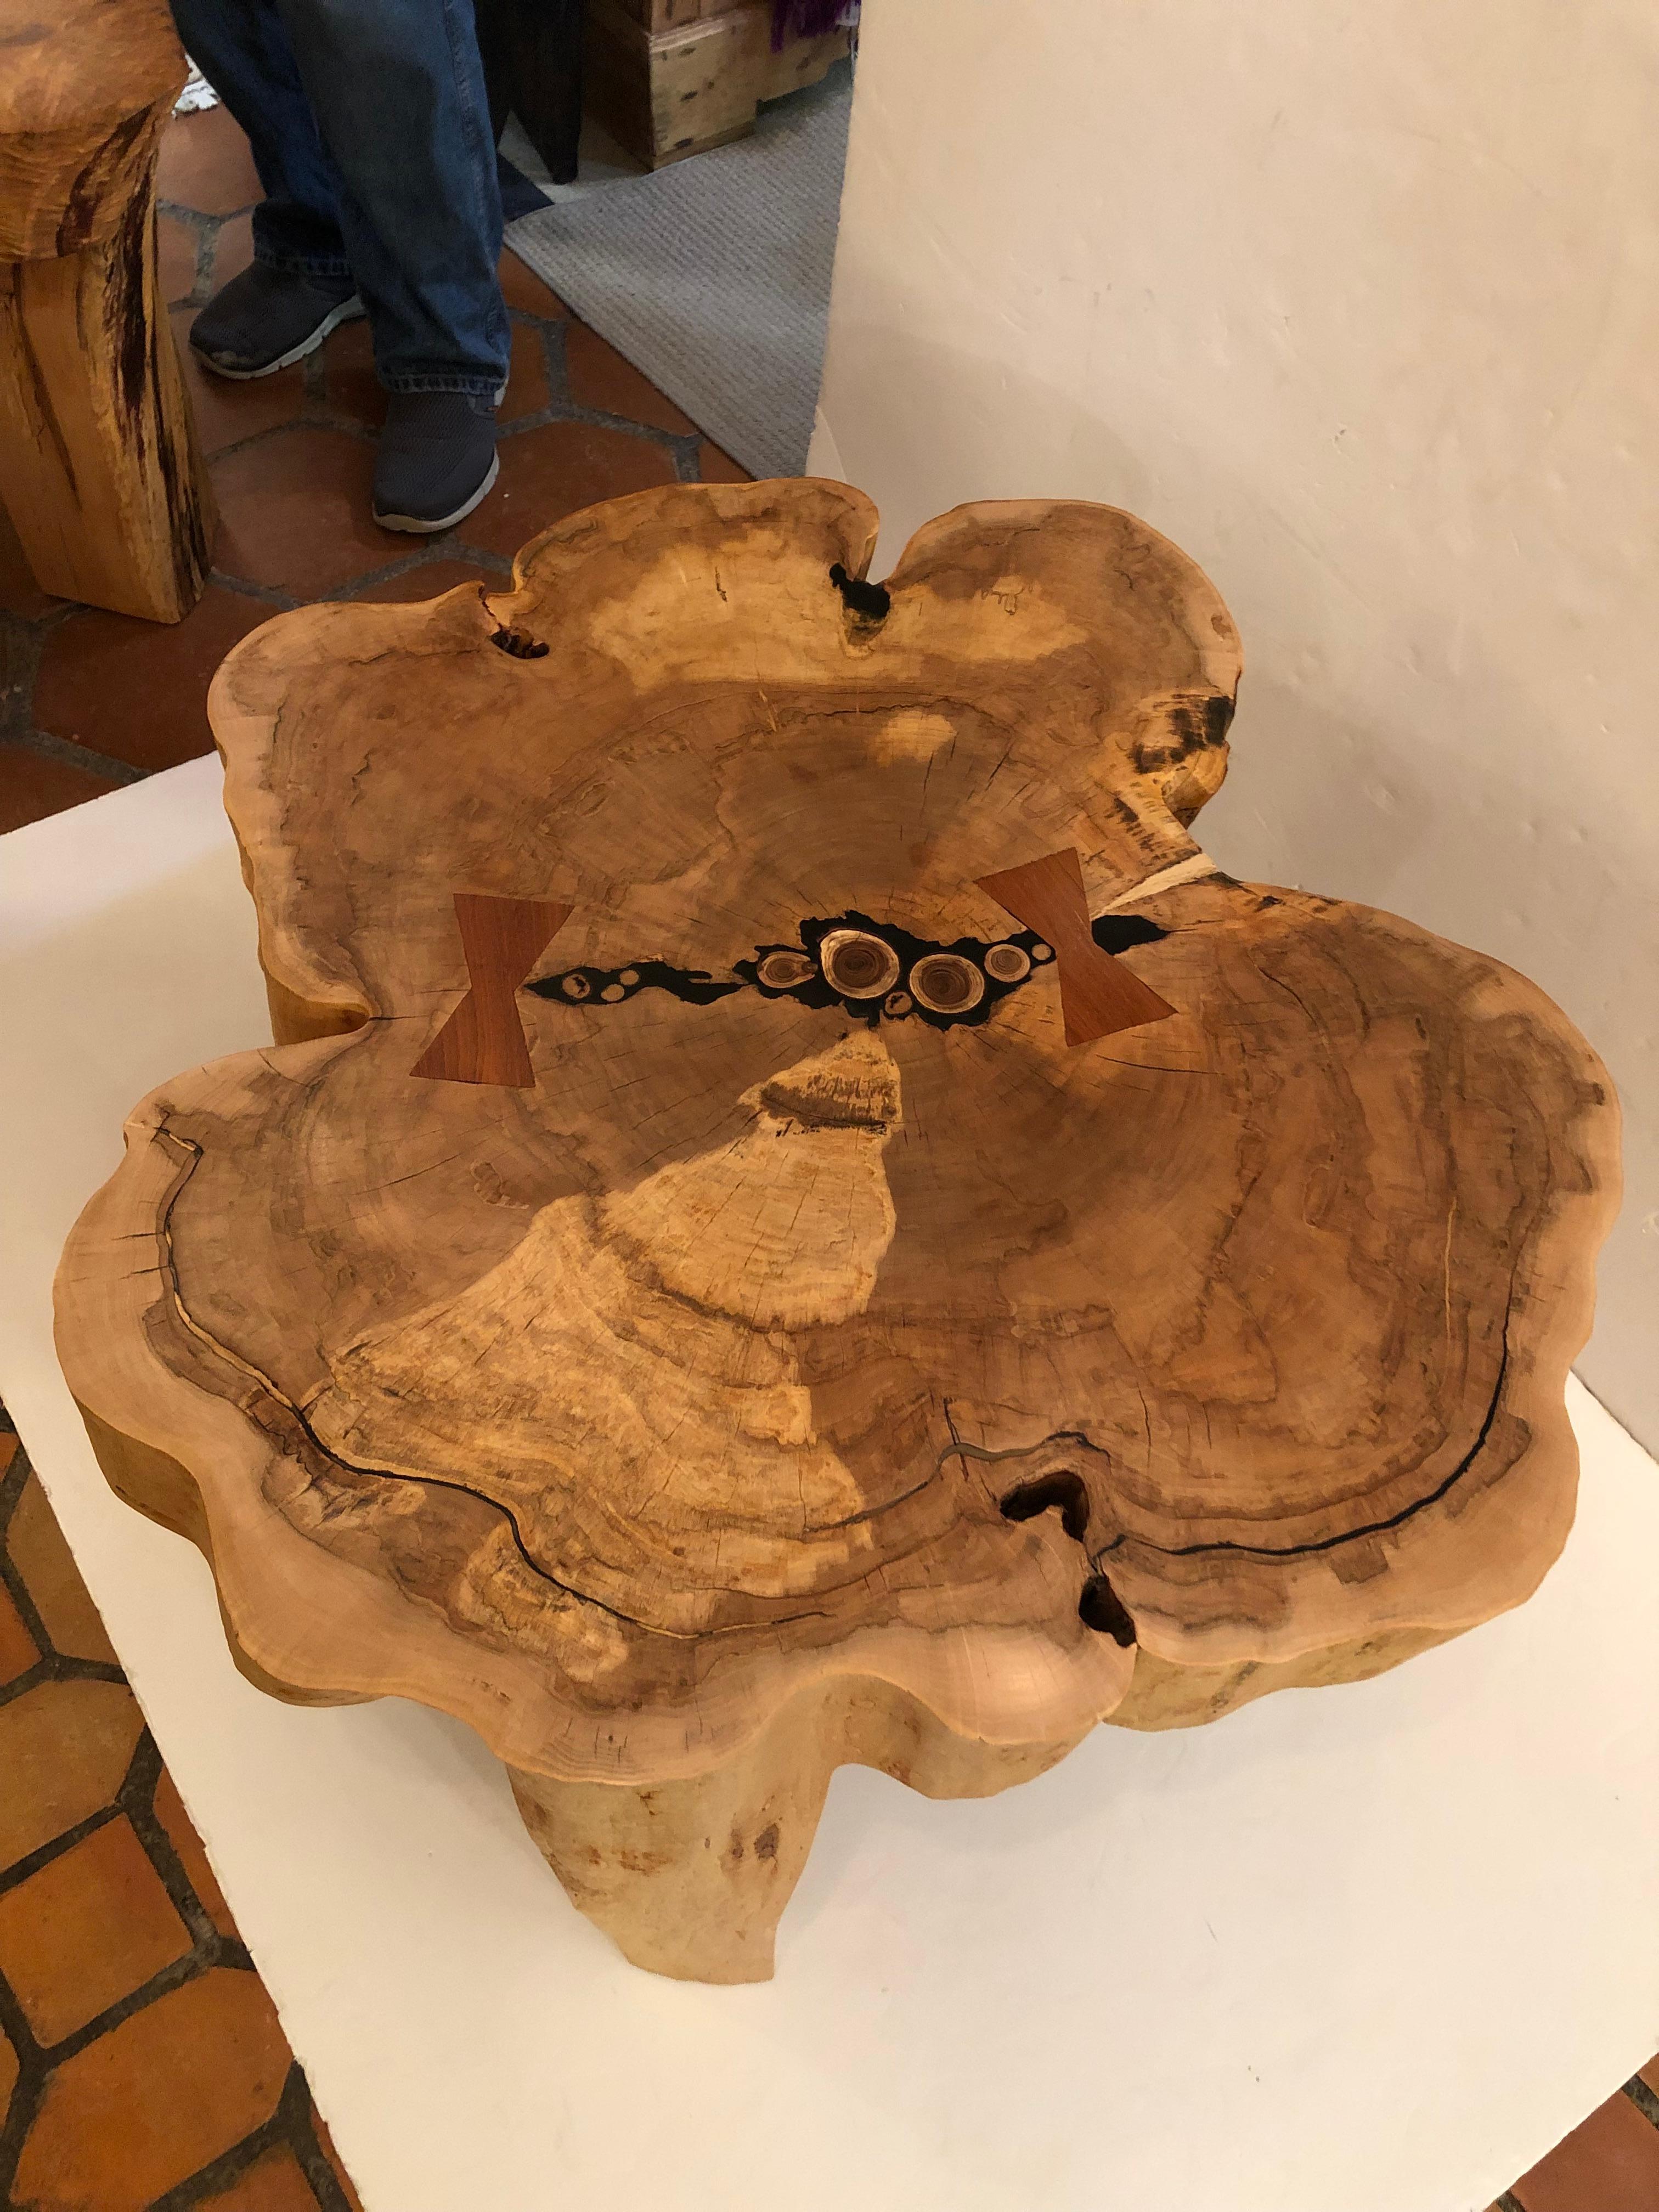 odd shaped coffee tables